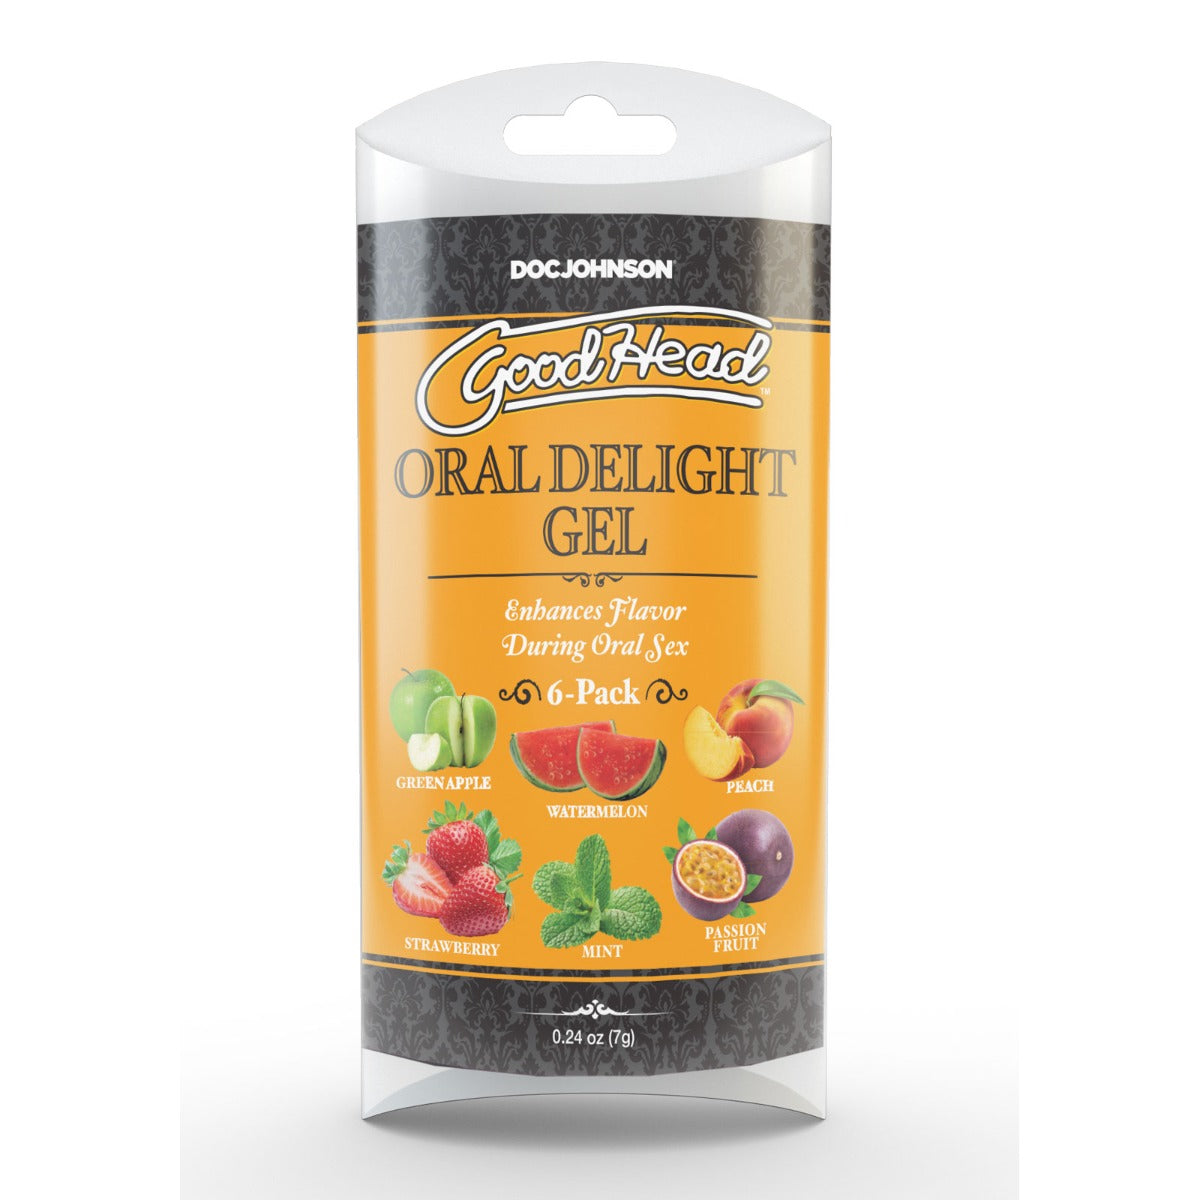 GoodHead | Oral Delight Gel 6 Pack - Green Apple, Mint, Peach, Strawberry, Watermelon & Passion Fruit